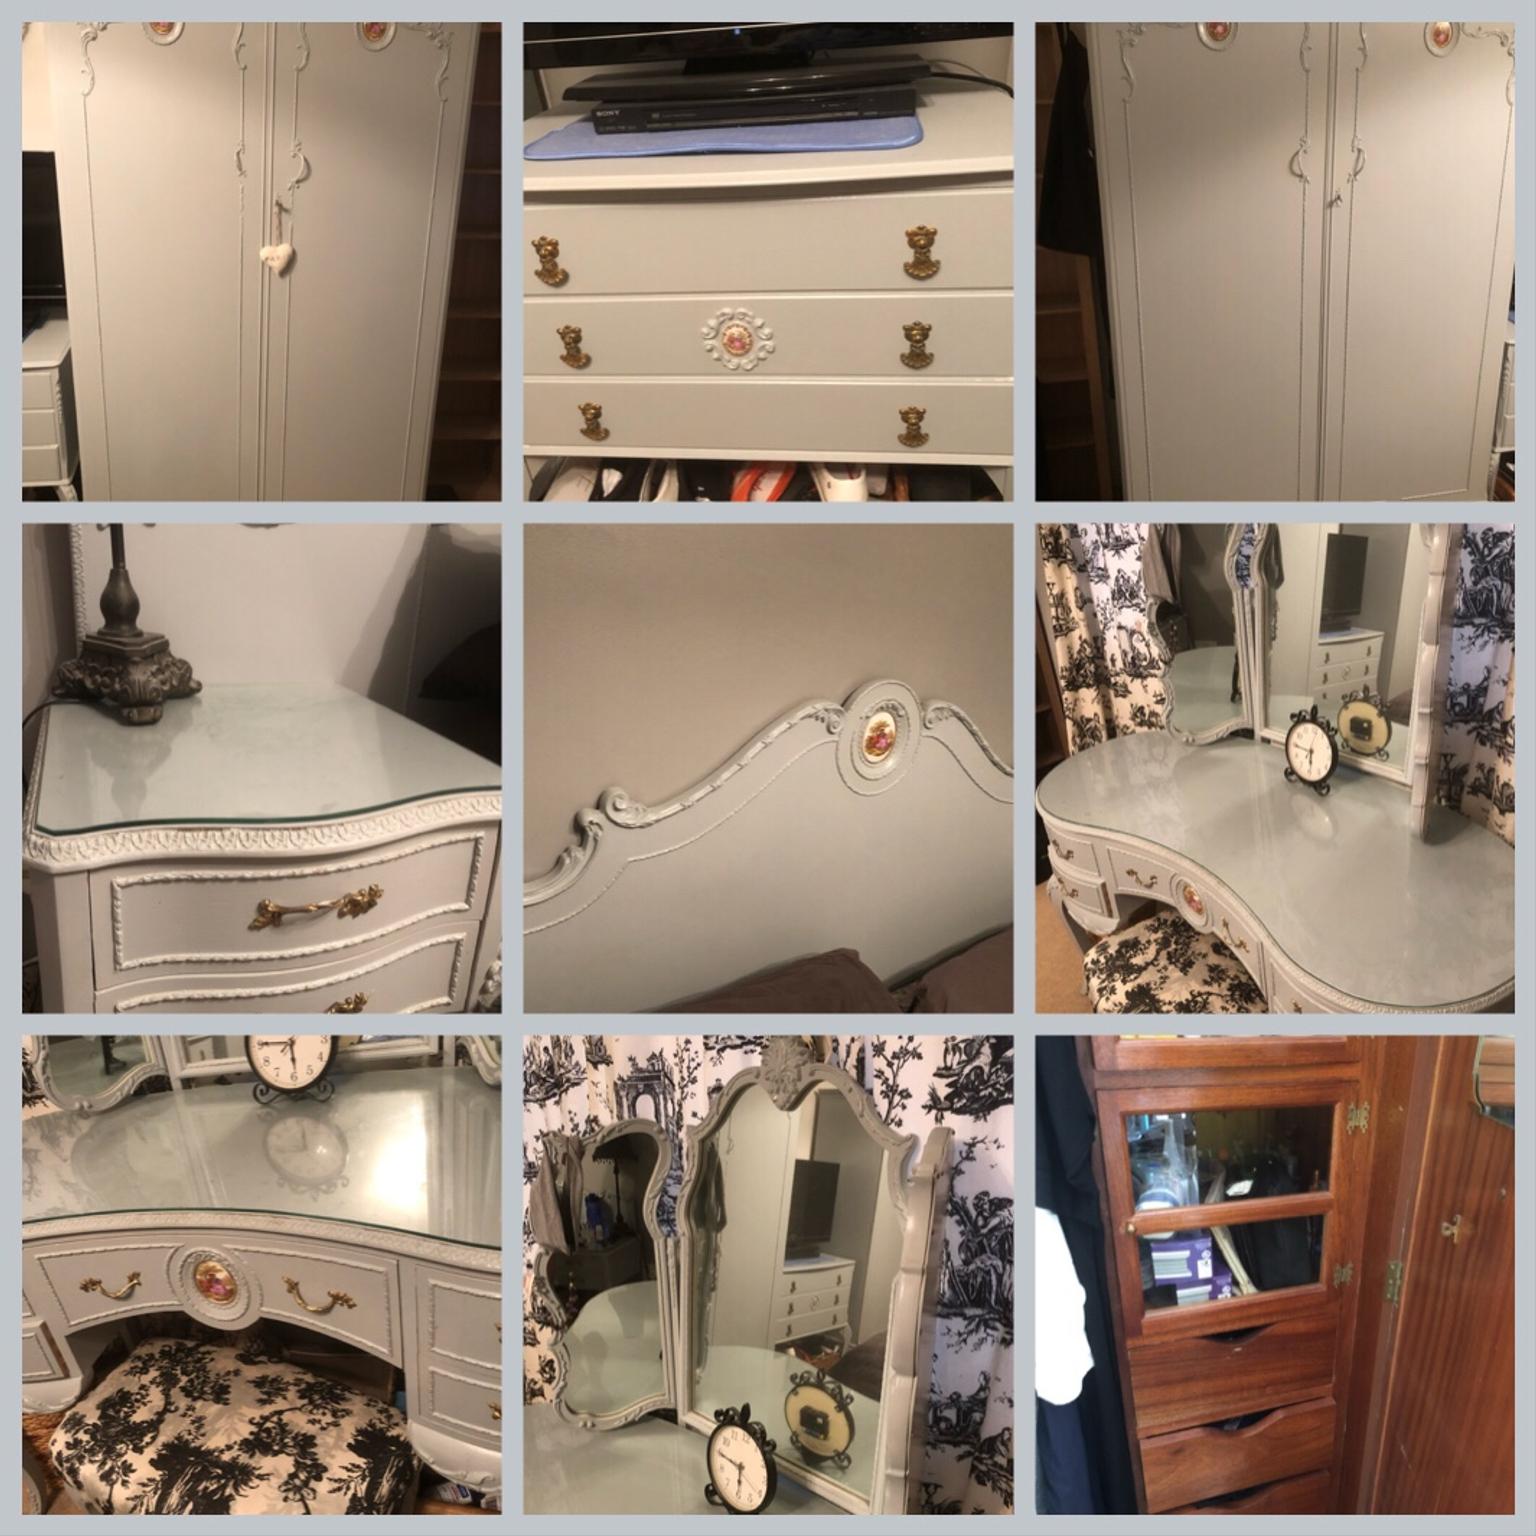 Shabby Chic French Style Bedroom Furniture In S7 Sheffield For 595 00 For Sale Shpock